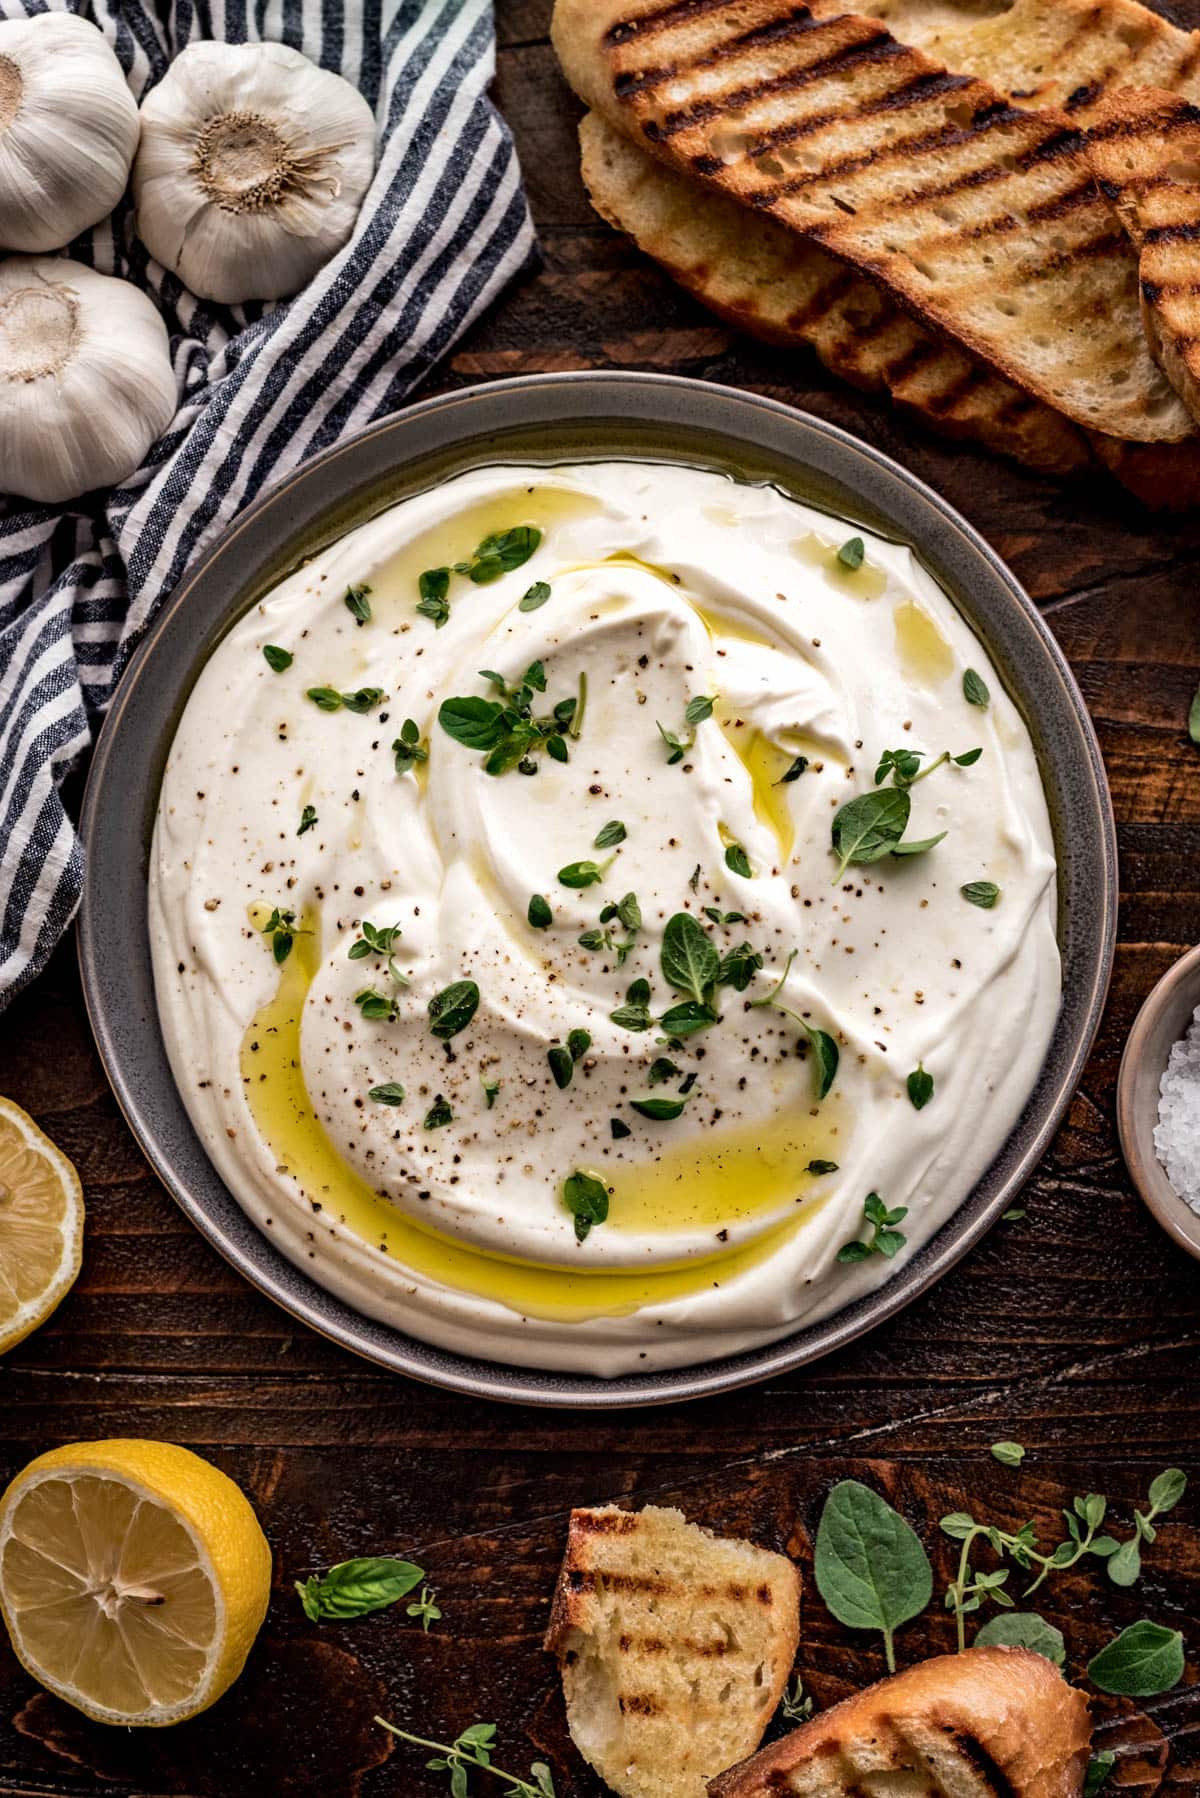 A large gray bowl holds whipped ricotta which is topped with small leaves of fresh oregano and thyme, cracked black pepper, and a drizzle of olive oil. The bowl is on a rustic wooden table, and surrounded by grilled bread, a gray and white striped towel, halved lemons, and a pinch bowl of coarse salt.